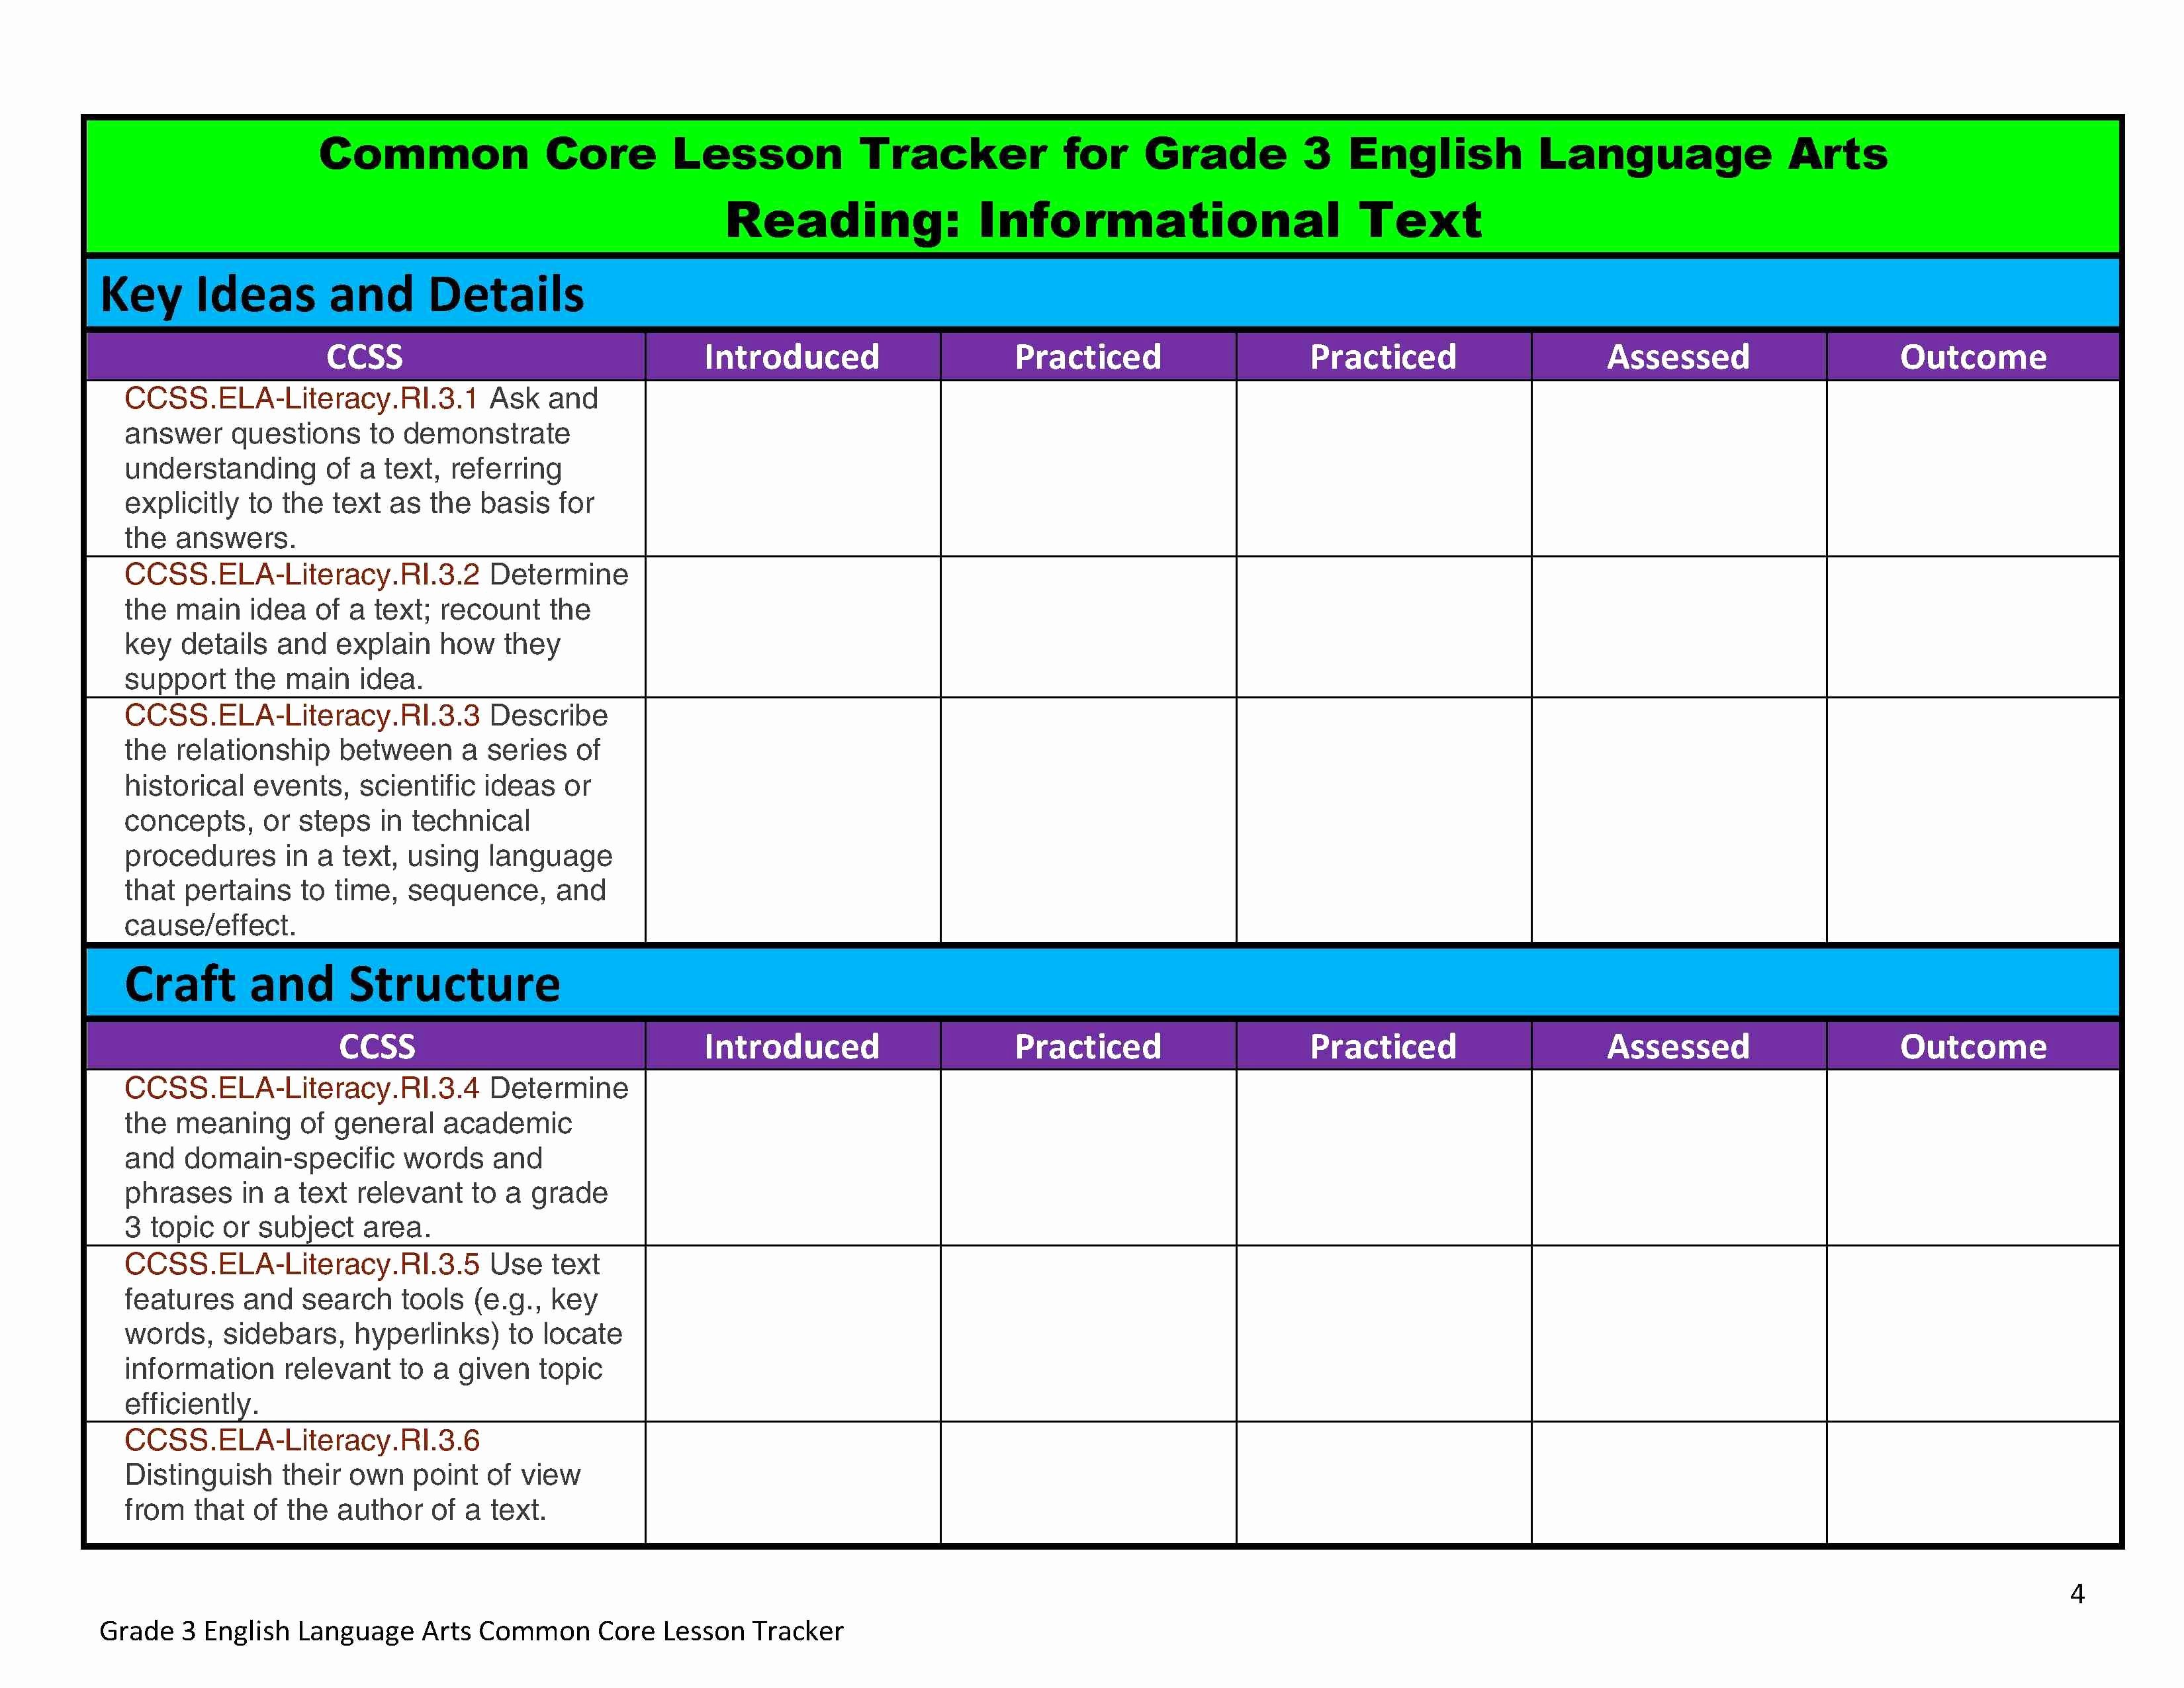 Standards Based Lesson Plan Template New Free Editable Mon Core Lesson Plan organizers for Math and Ela Grades K 5